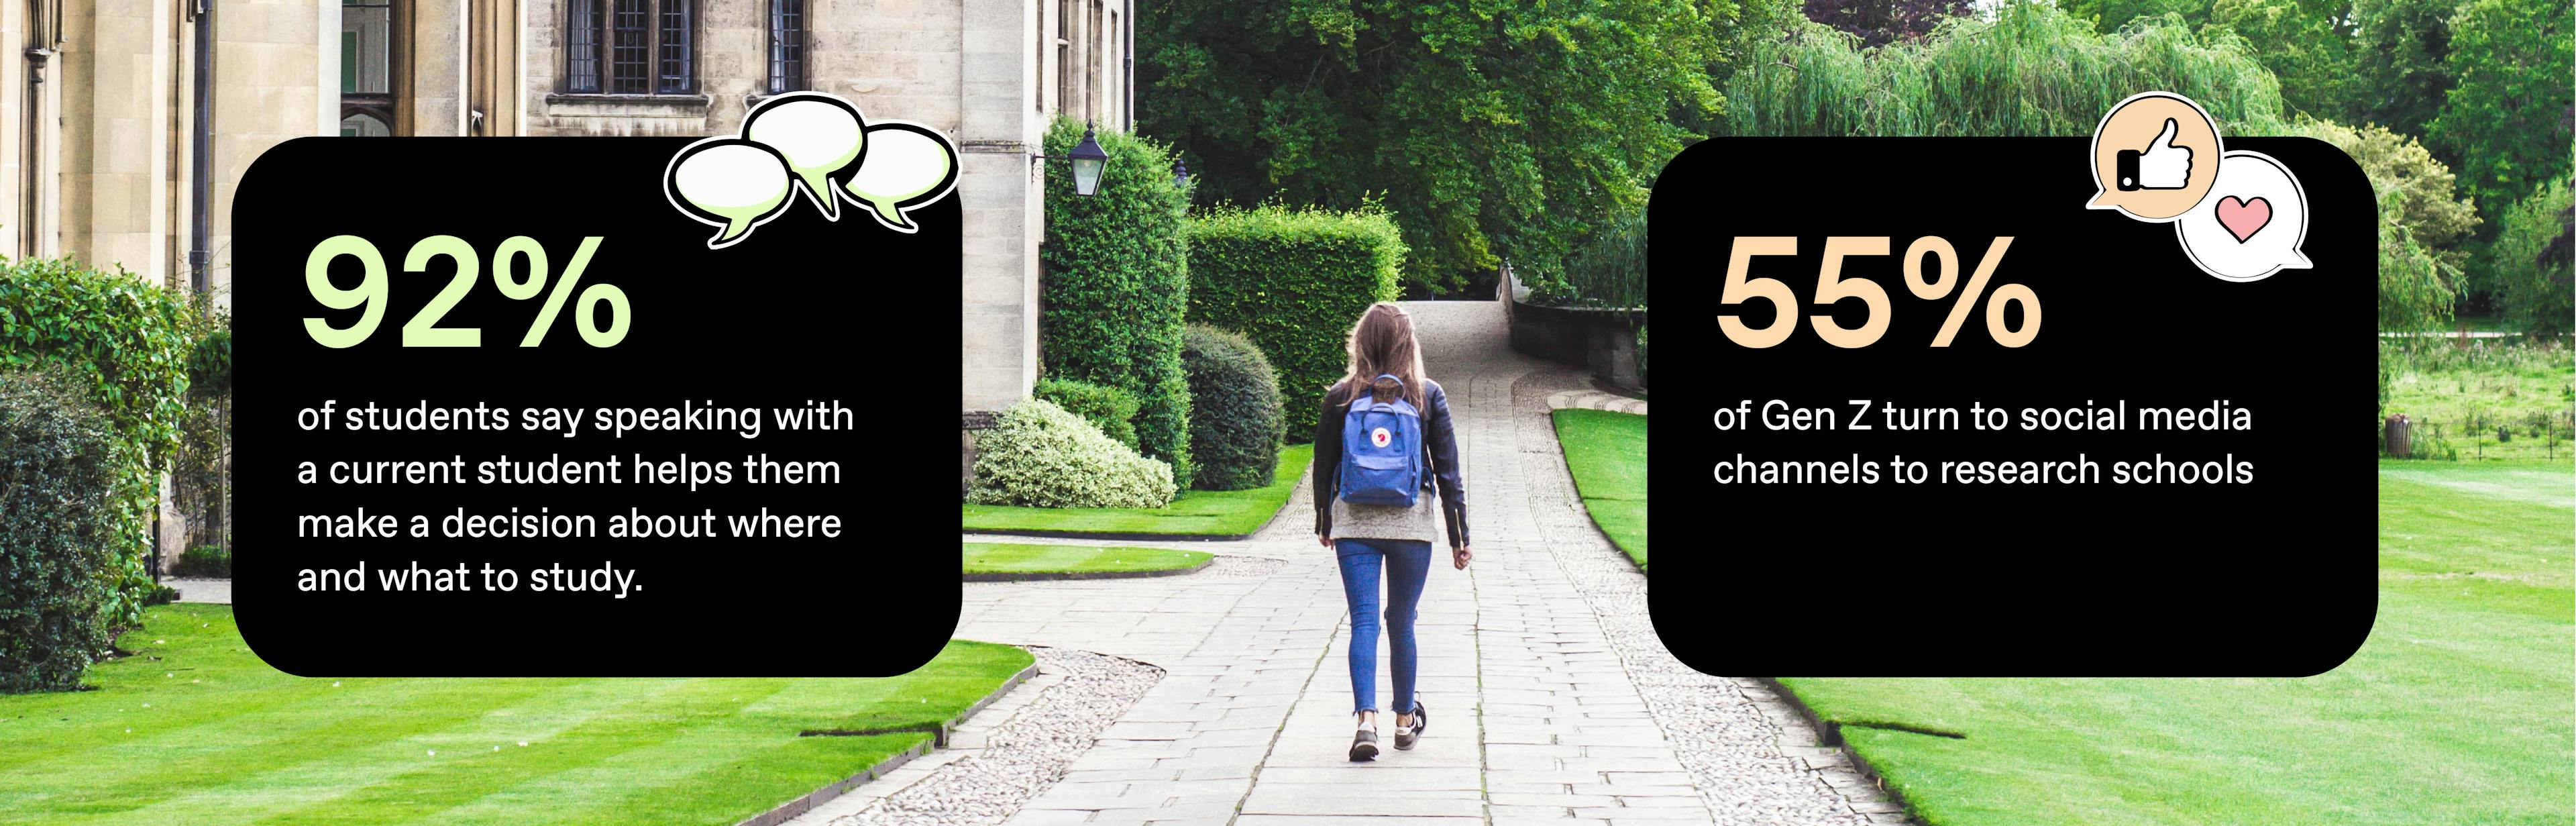 image of woman walking down path with text overlay reading "92% of. prospective students say speaking with a current student can help them make a decision of where to study" and "55% of gen z students turn to social media to research schools"